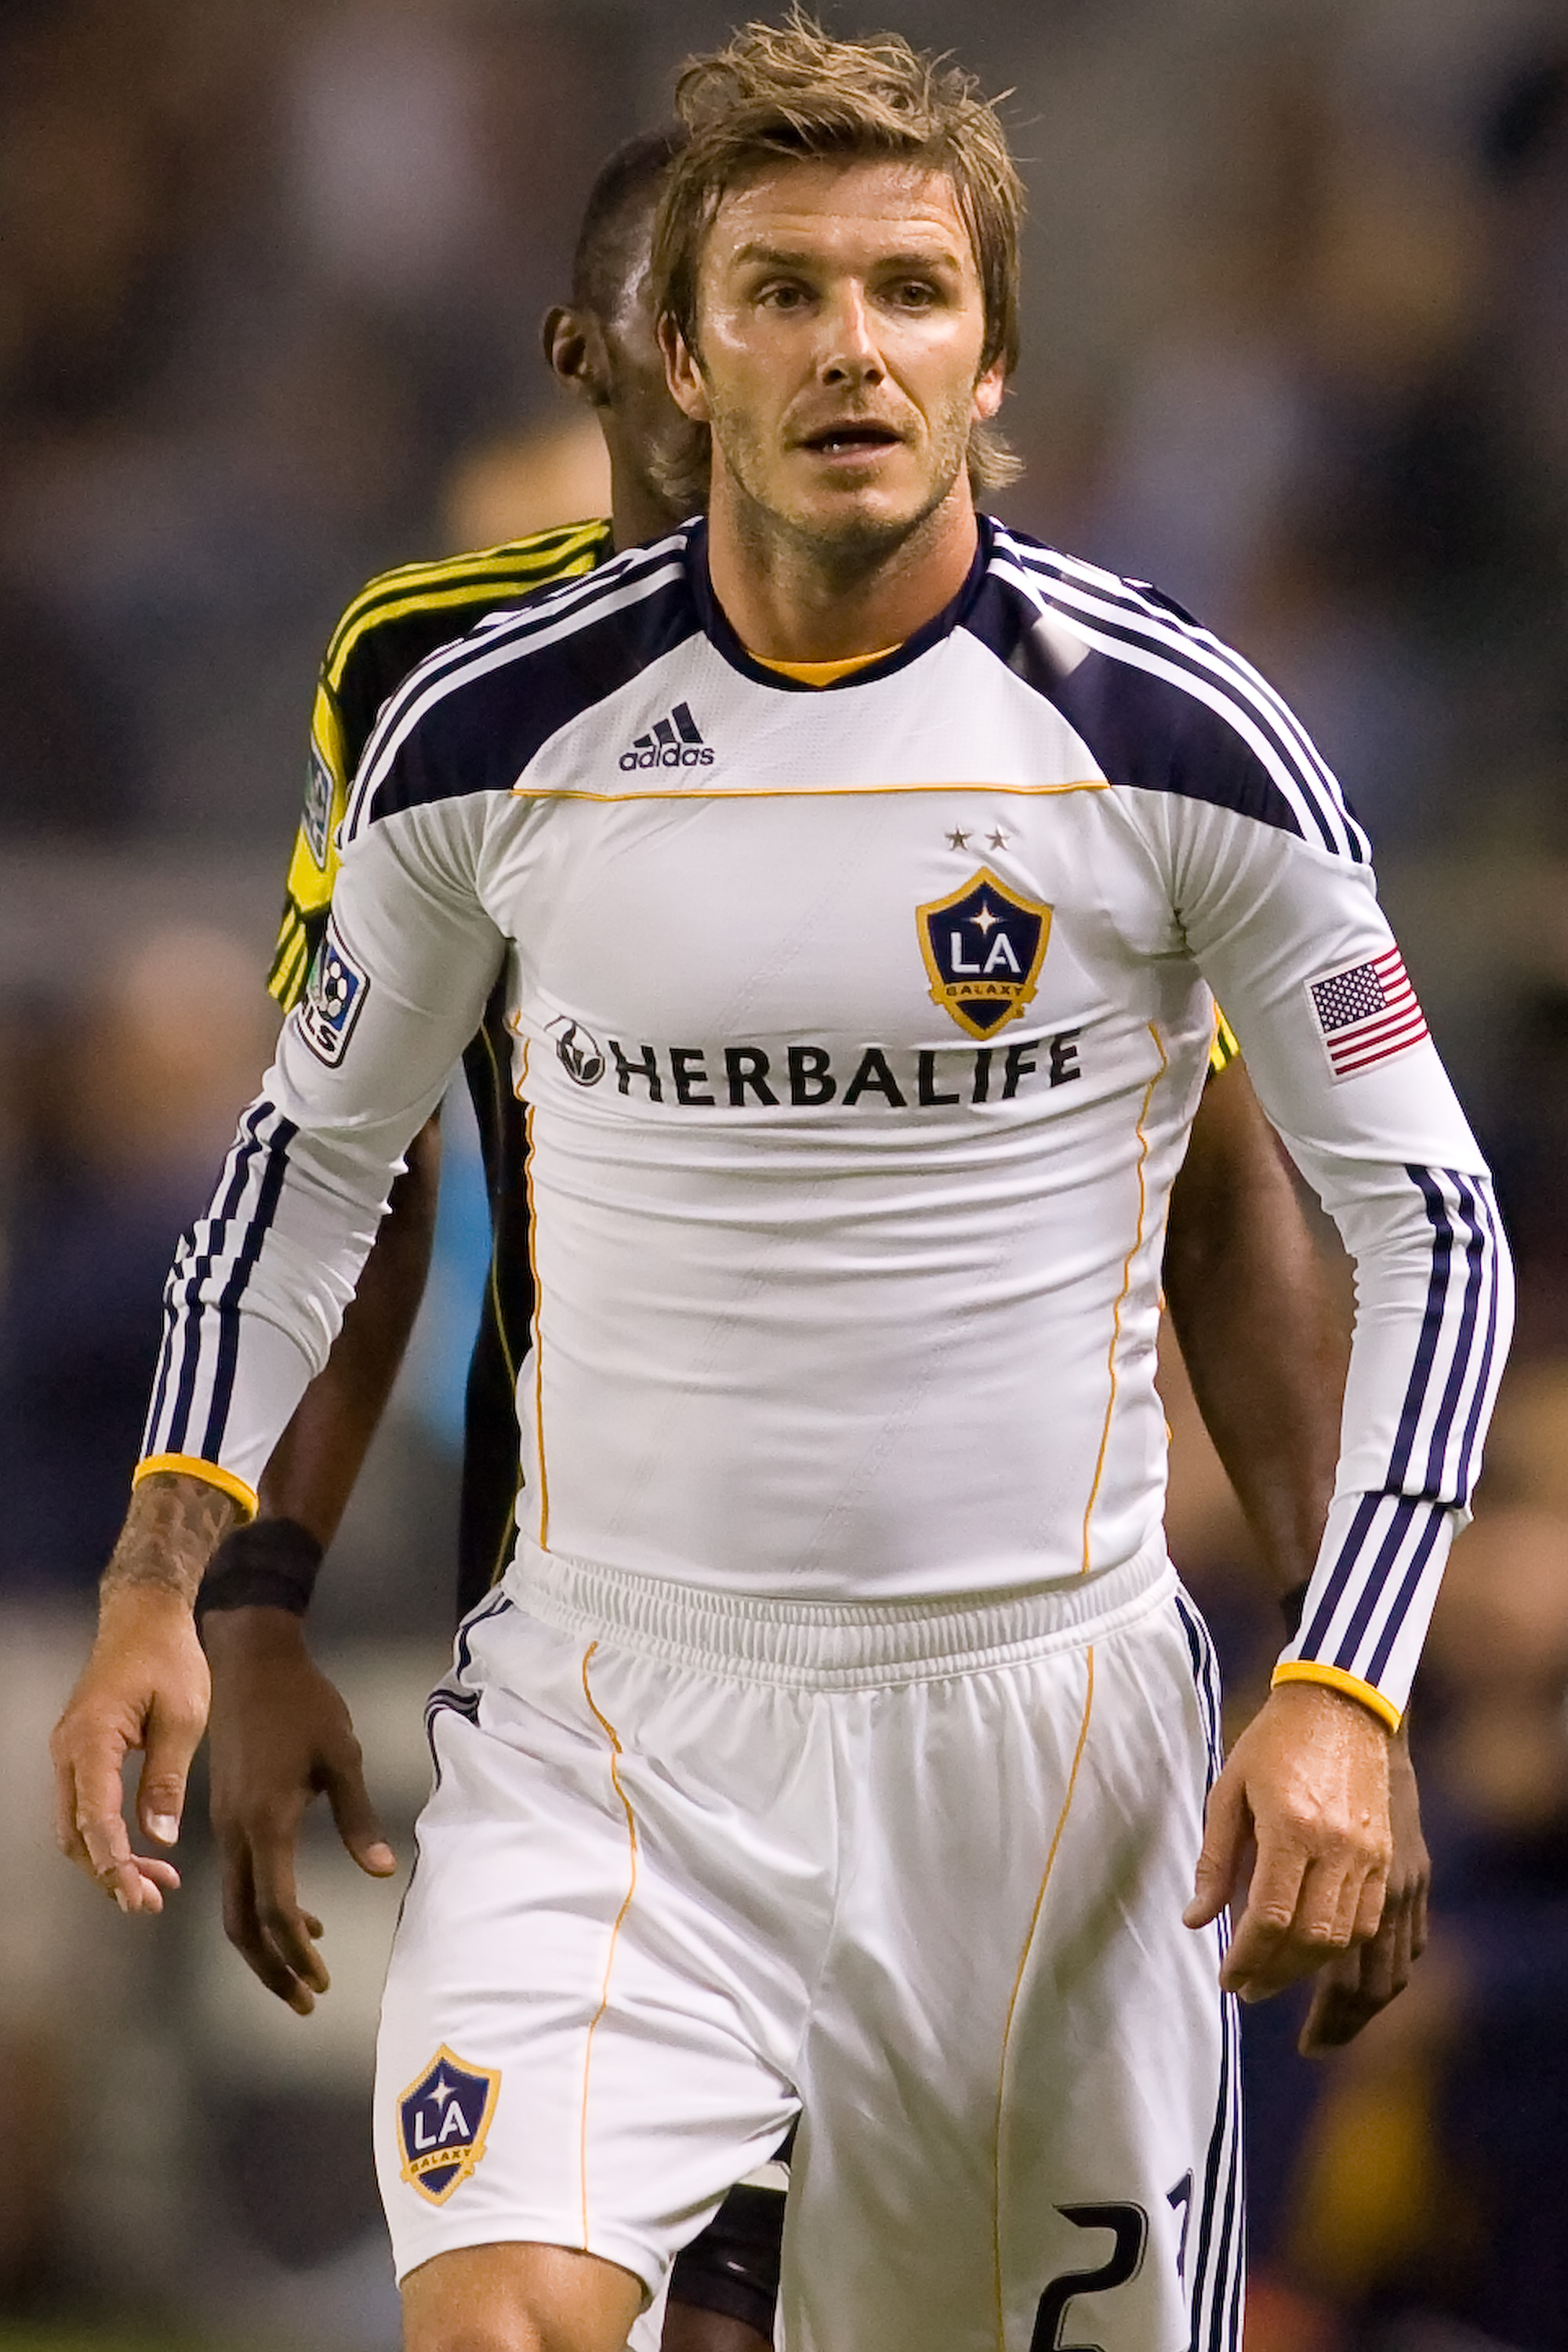 Did Beckham wear the tightest jersey ever? - SBI Soccer